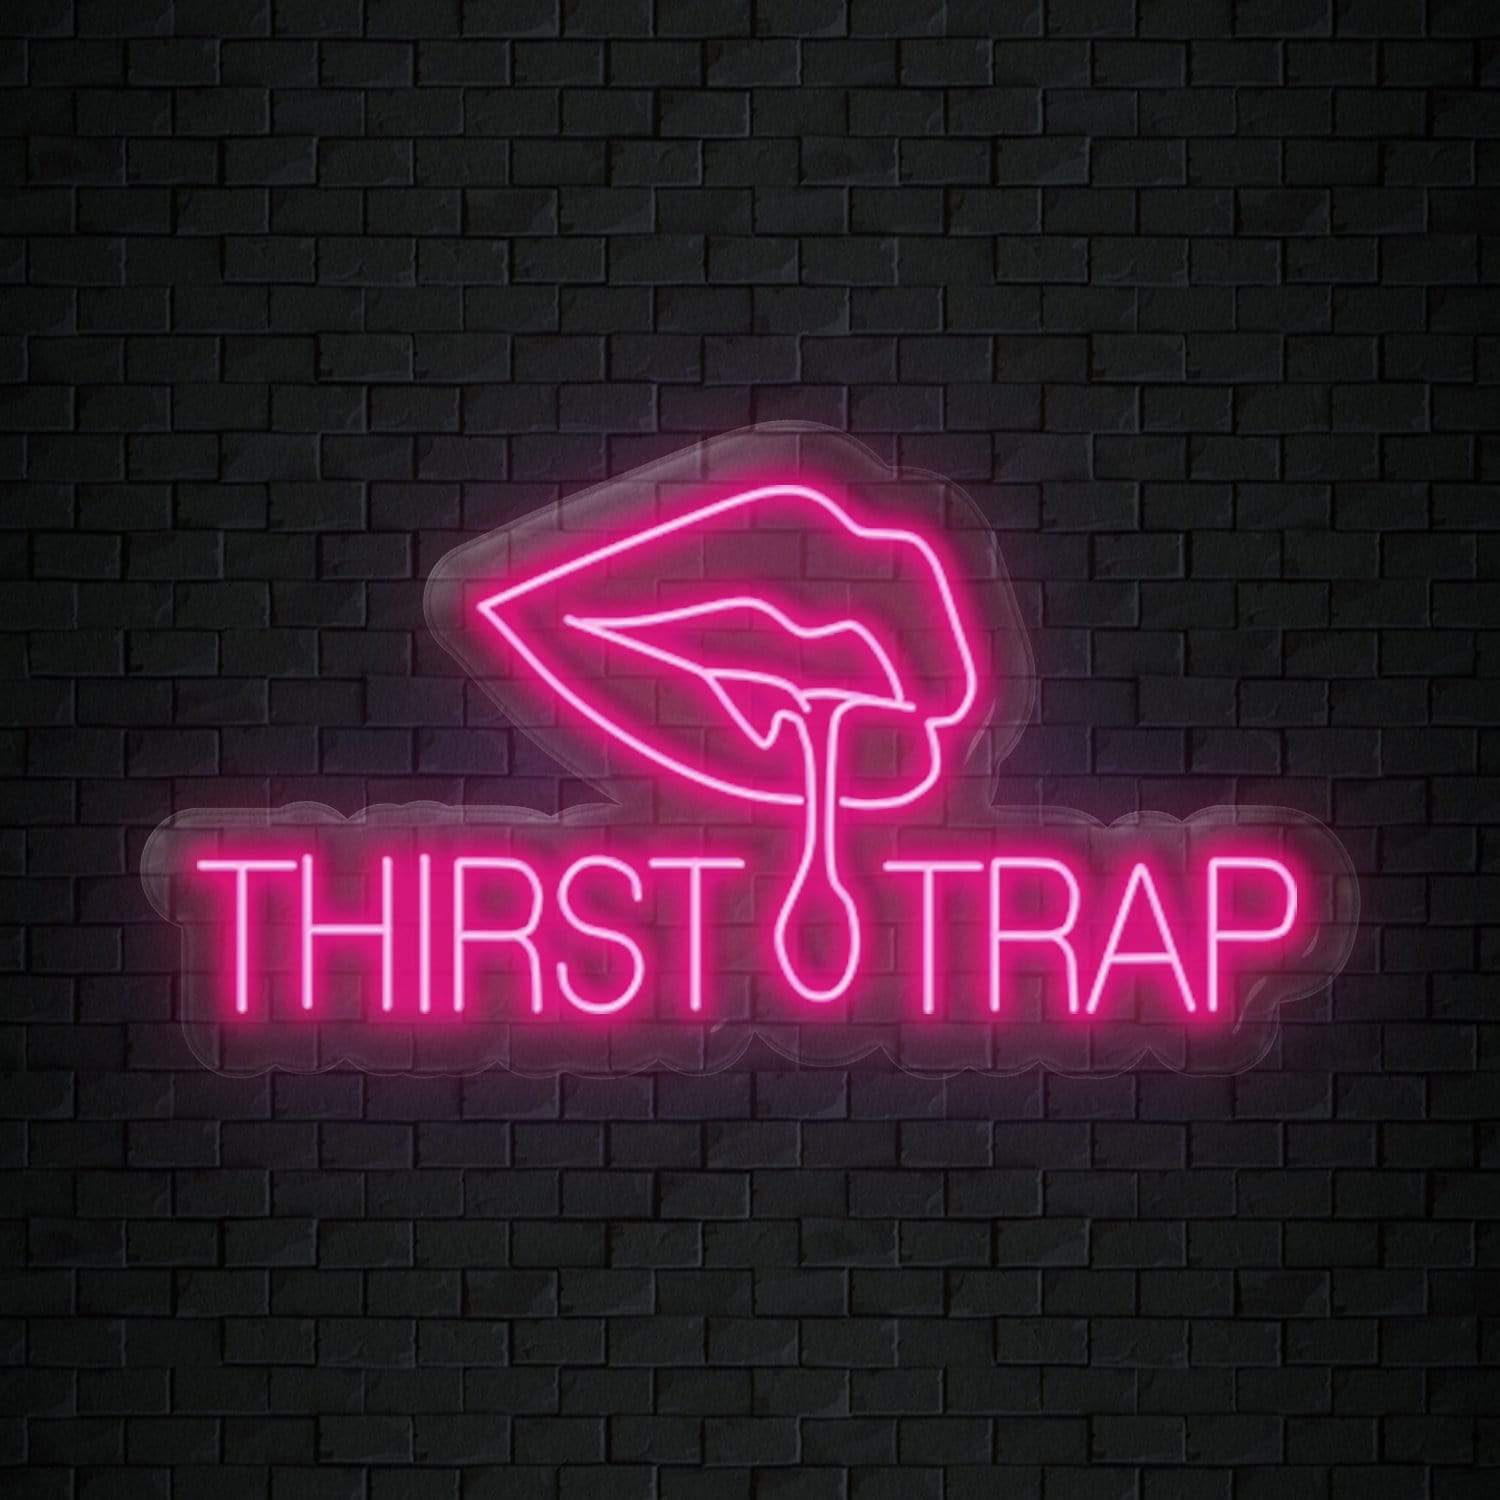 "Thirst Trap" LED Neonschild Sign - NEONEVERGLOW